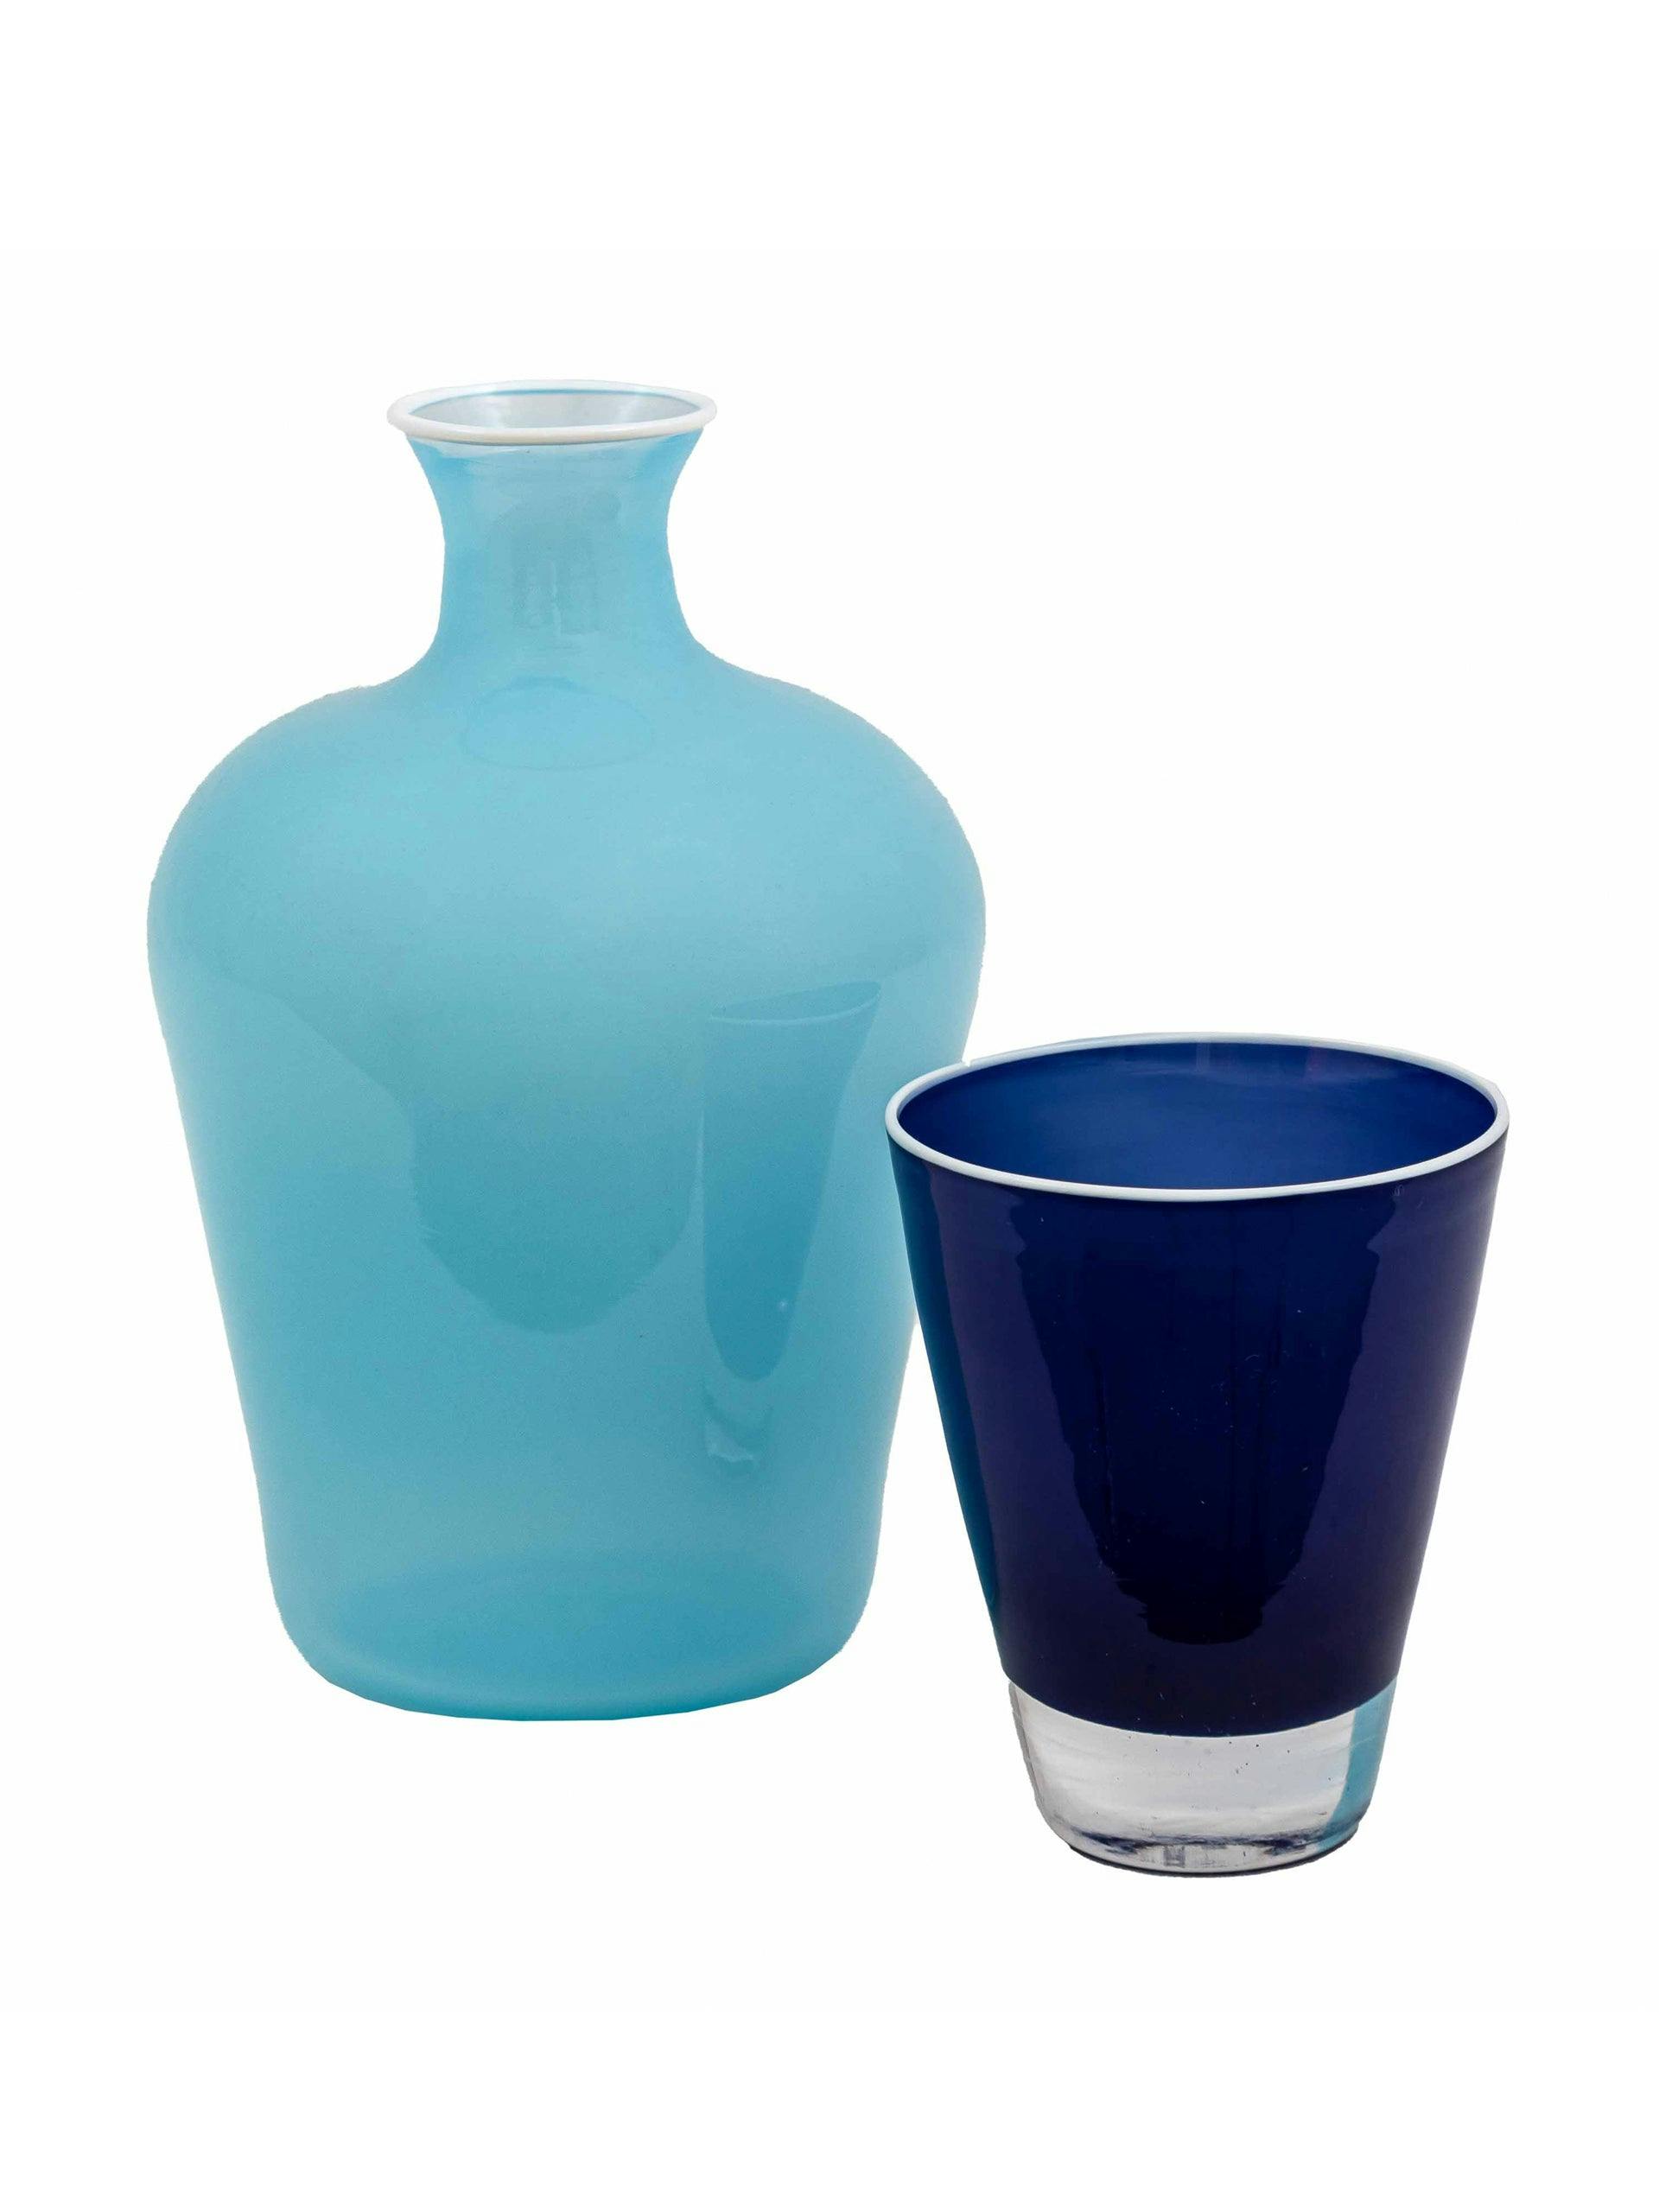 Bedside carafe and tumbler in sky and midnight blue